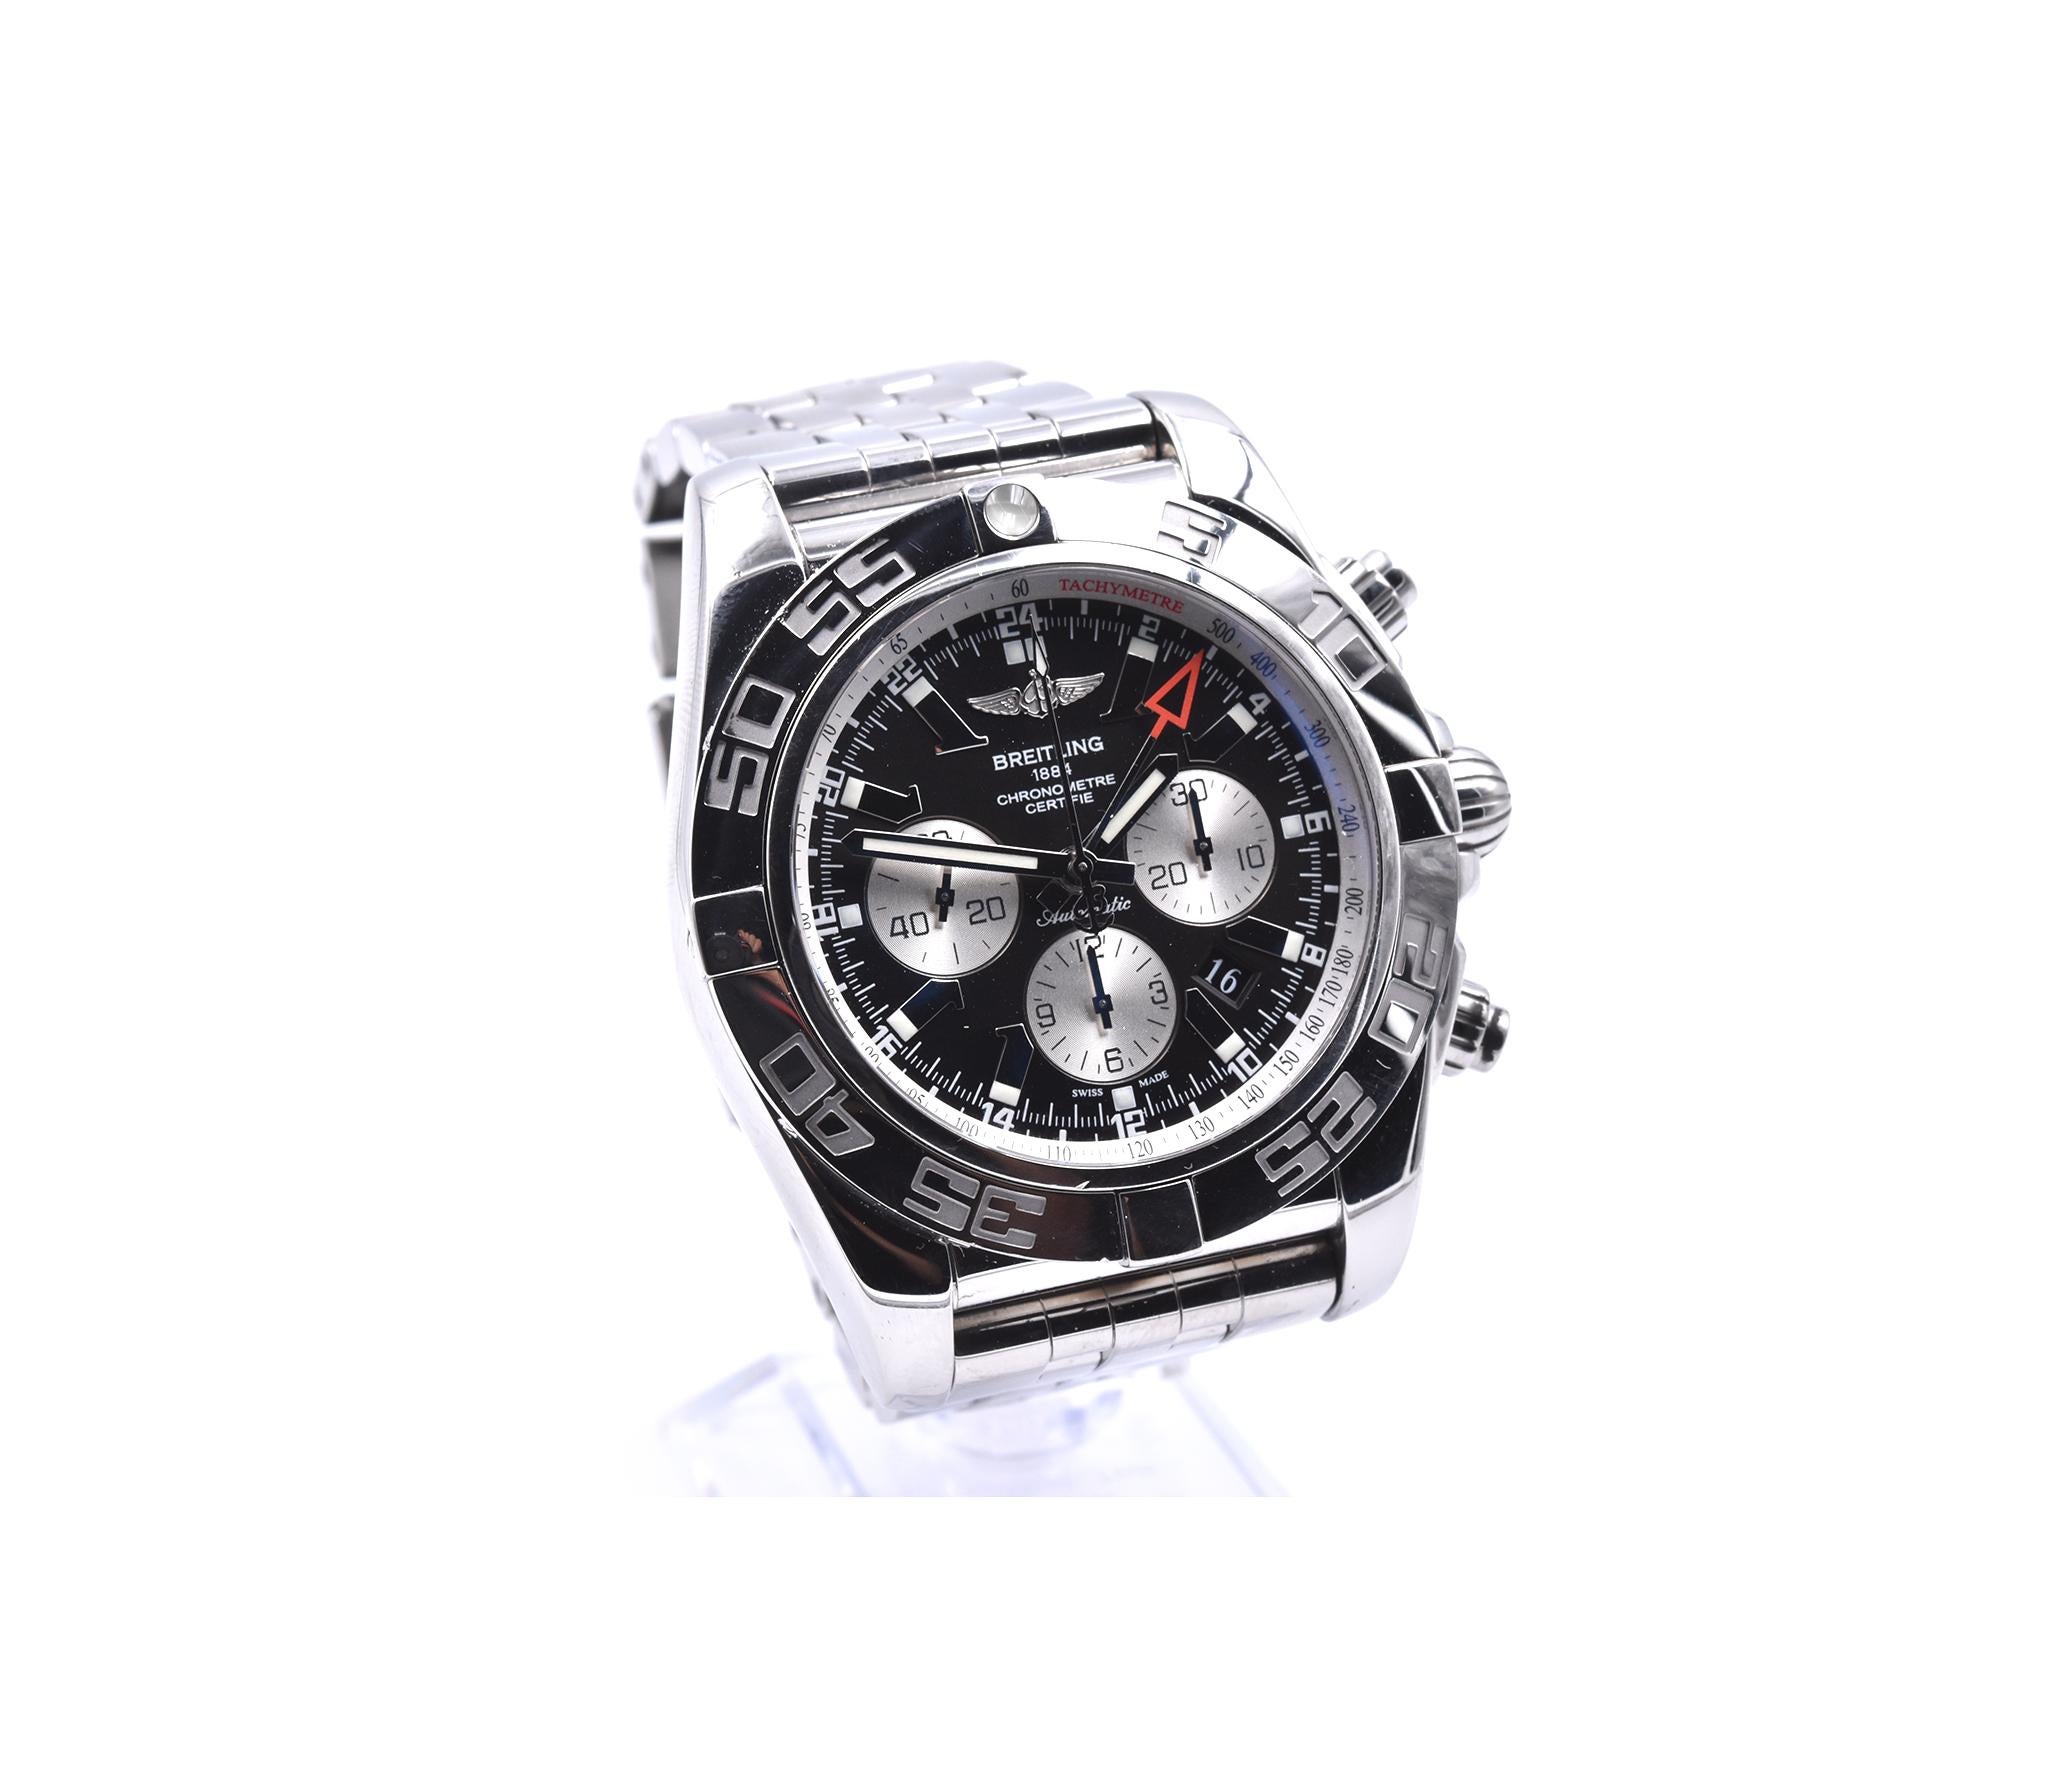 Movement: automatic 
Function: hours, minutes, sub-seconds, stop seconds, date, chronograph, GMT
Case: round 47mm case, sapphire protective crystal, stainless steel bi-directional diver’s bezel, Breitling engraved case back, waterproof to 500